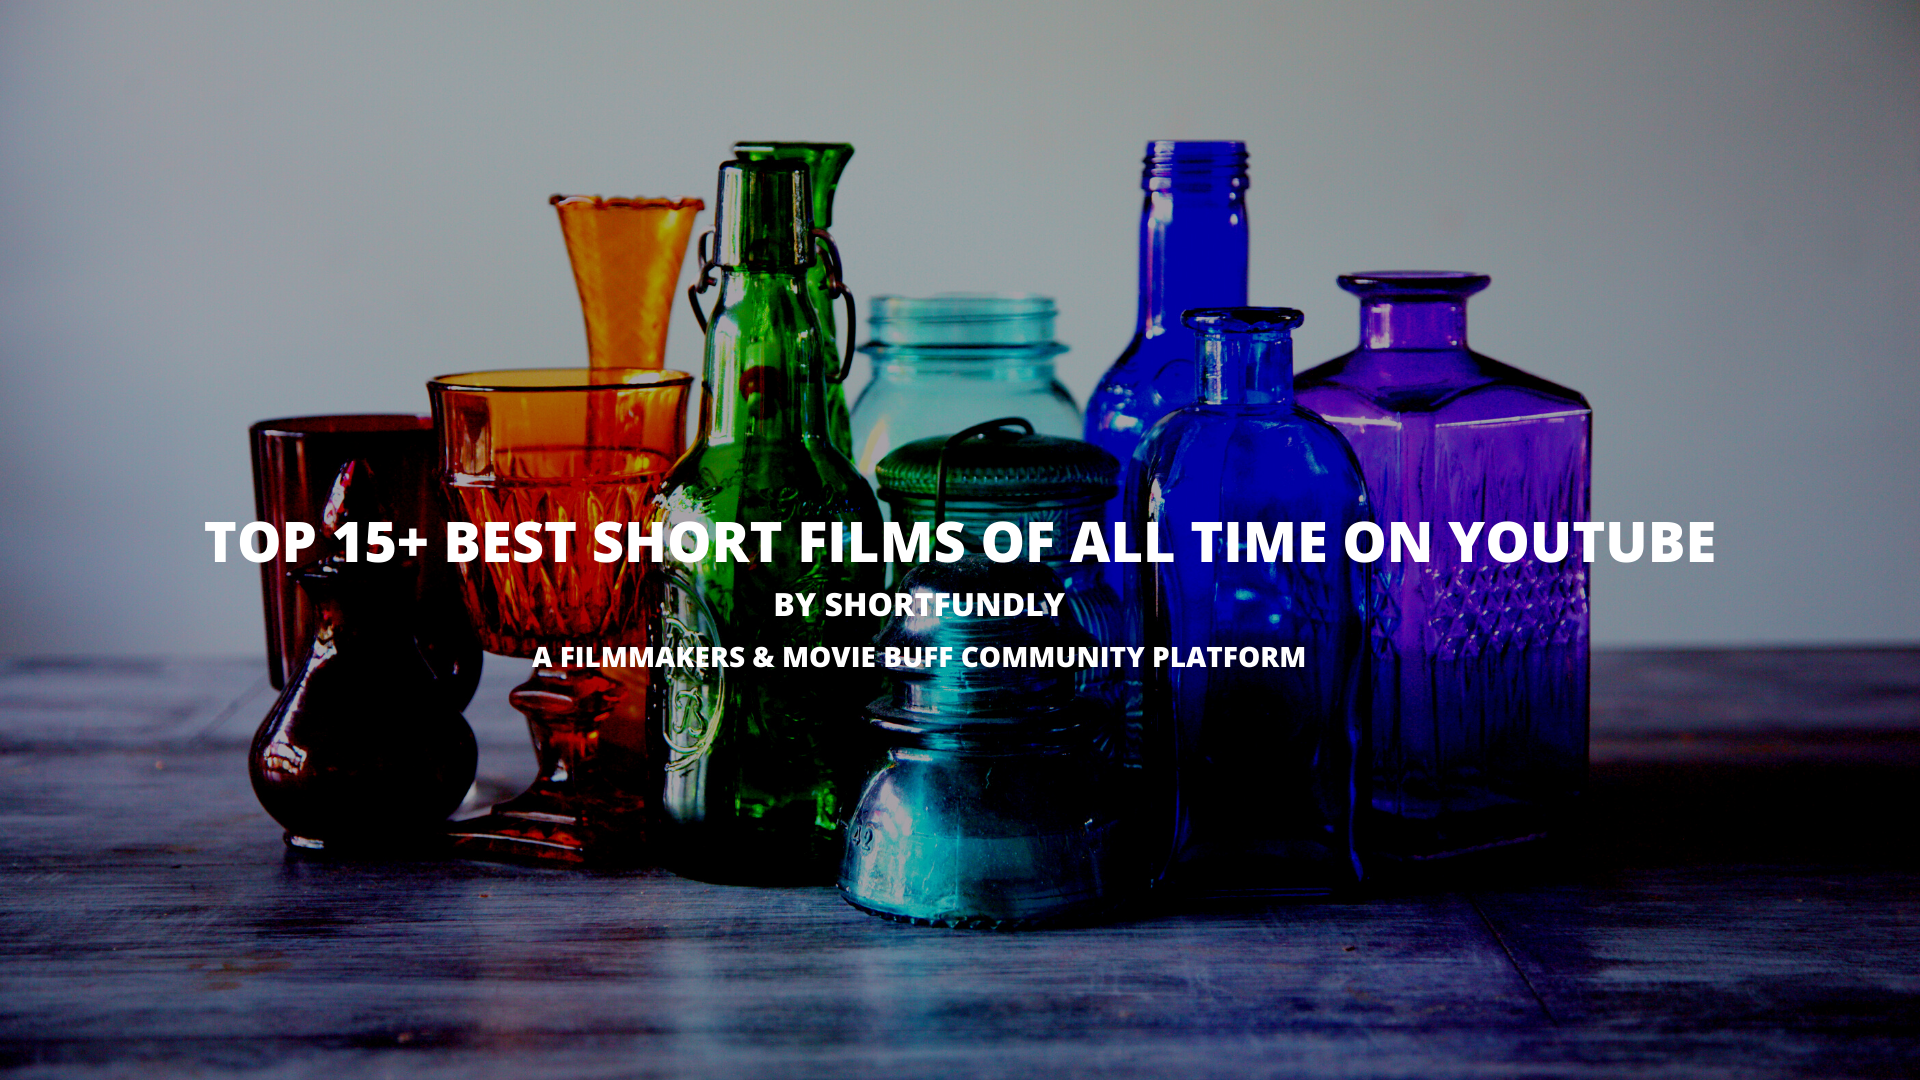 Top 15+ Best Short Films of All Time on YouTube